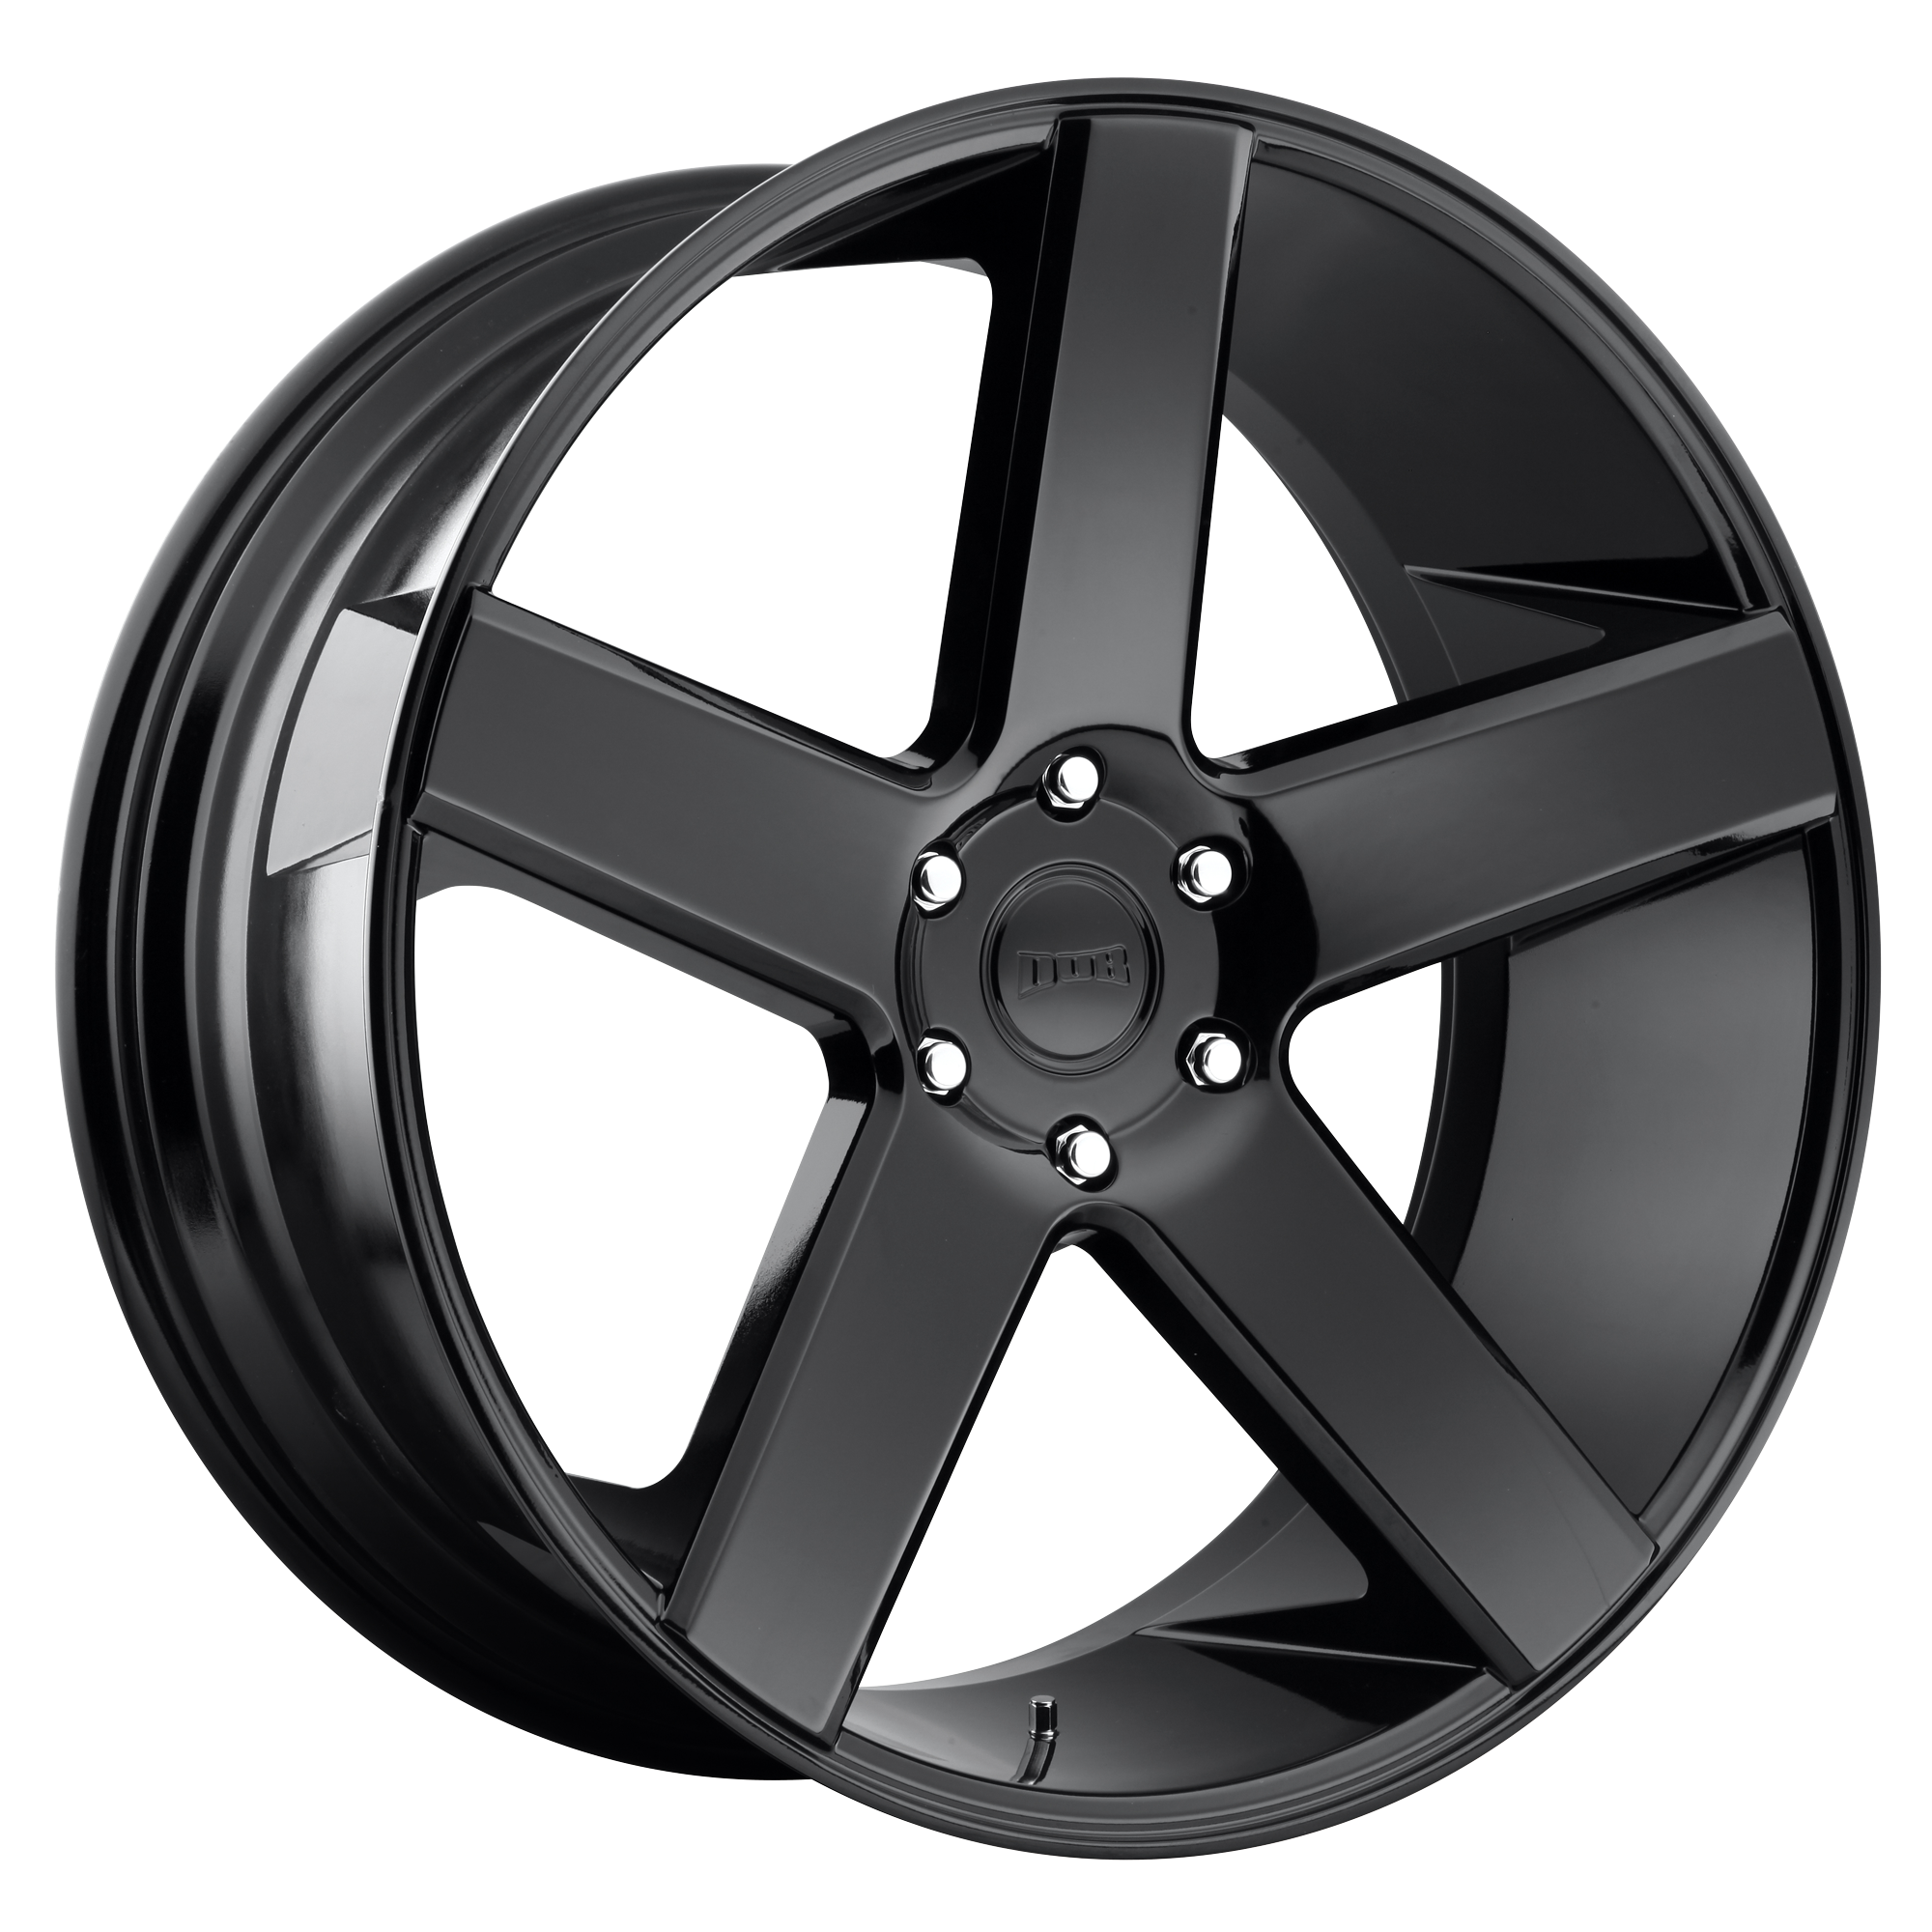 BALLER 20x9.5 5x127.00 GLOSS BLACK (30 mm) - Tires and Engine Performance